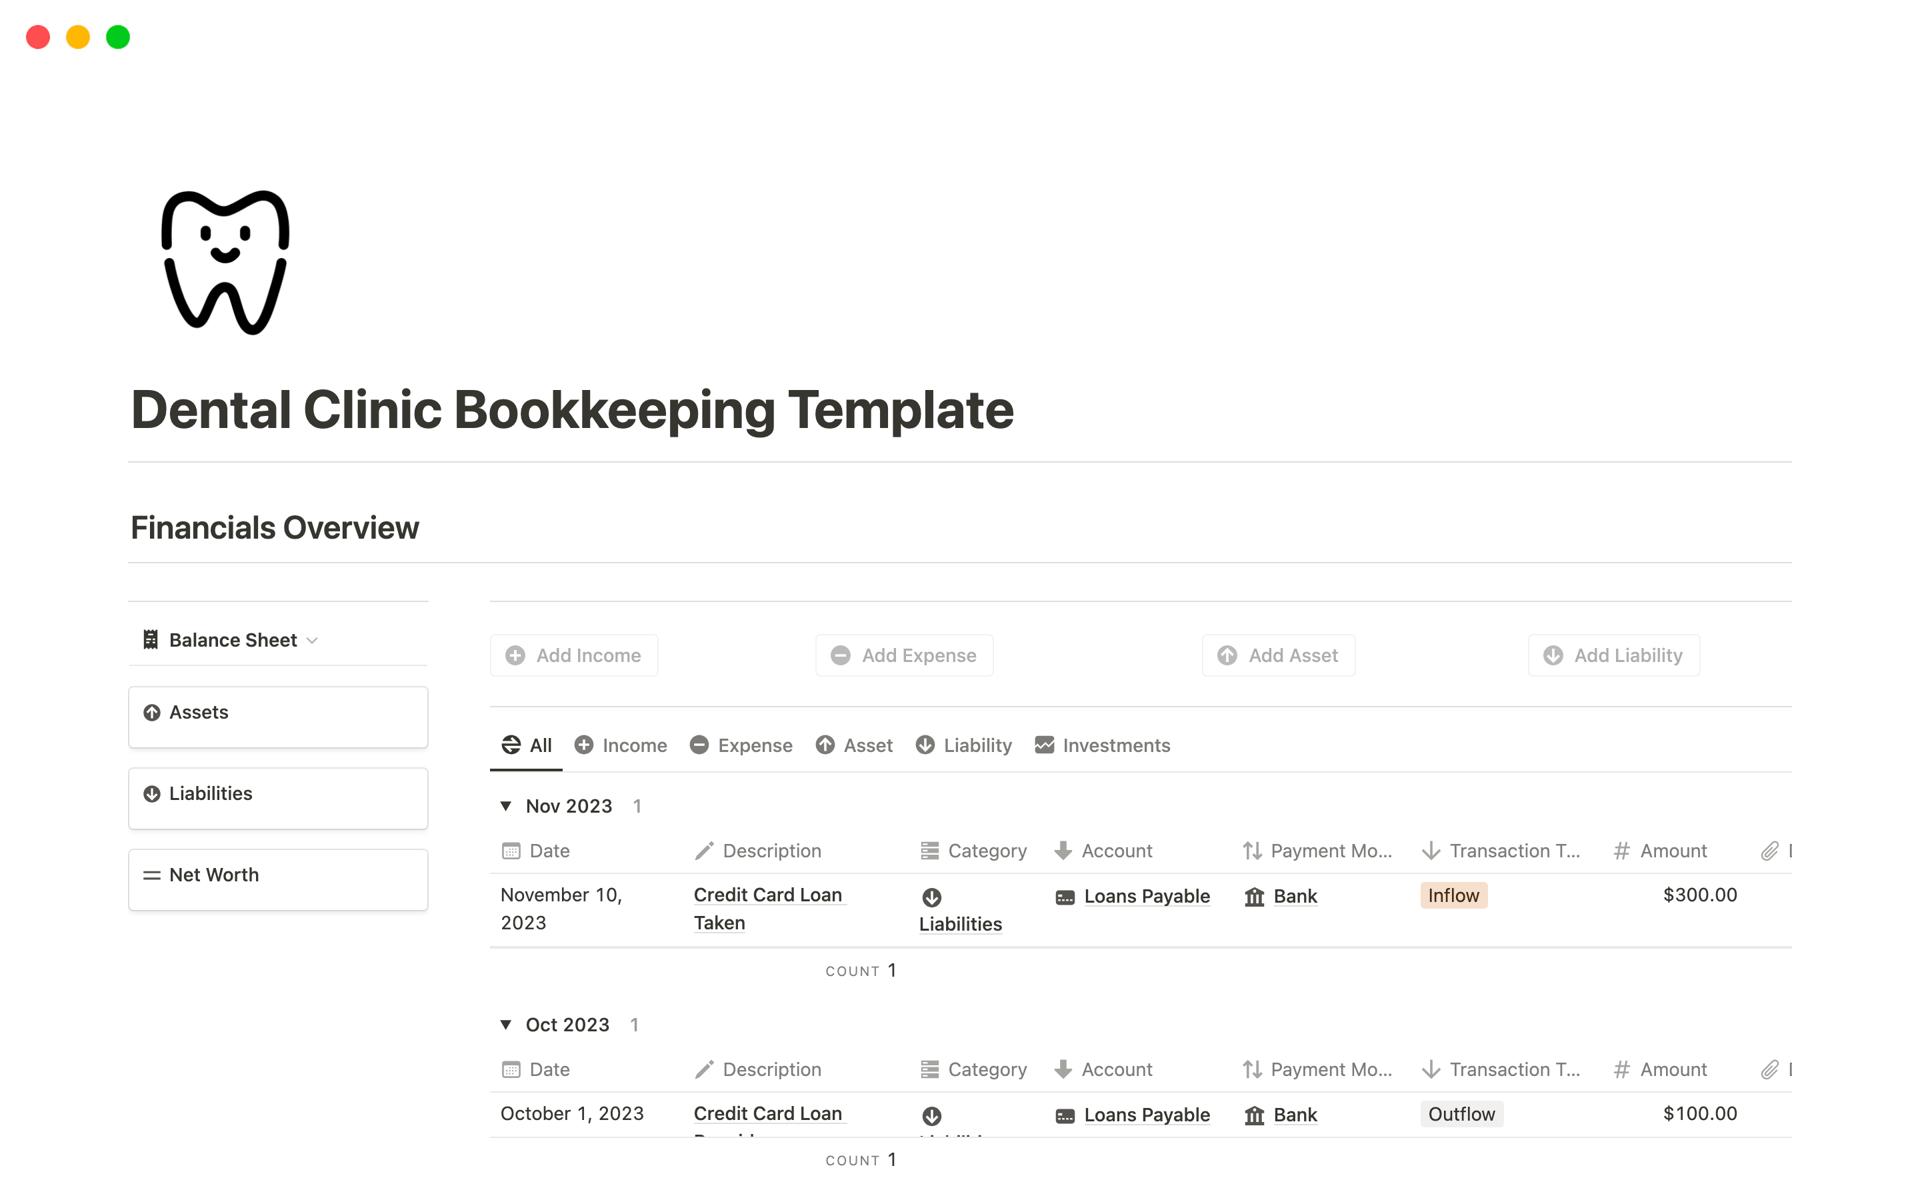 This bookkeeping template provides best solution for dental clinic to manage their business finances, produce income statement, balance sheet, cash flow statement and much more on a periodical basis. 